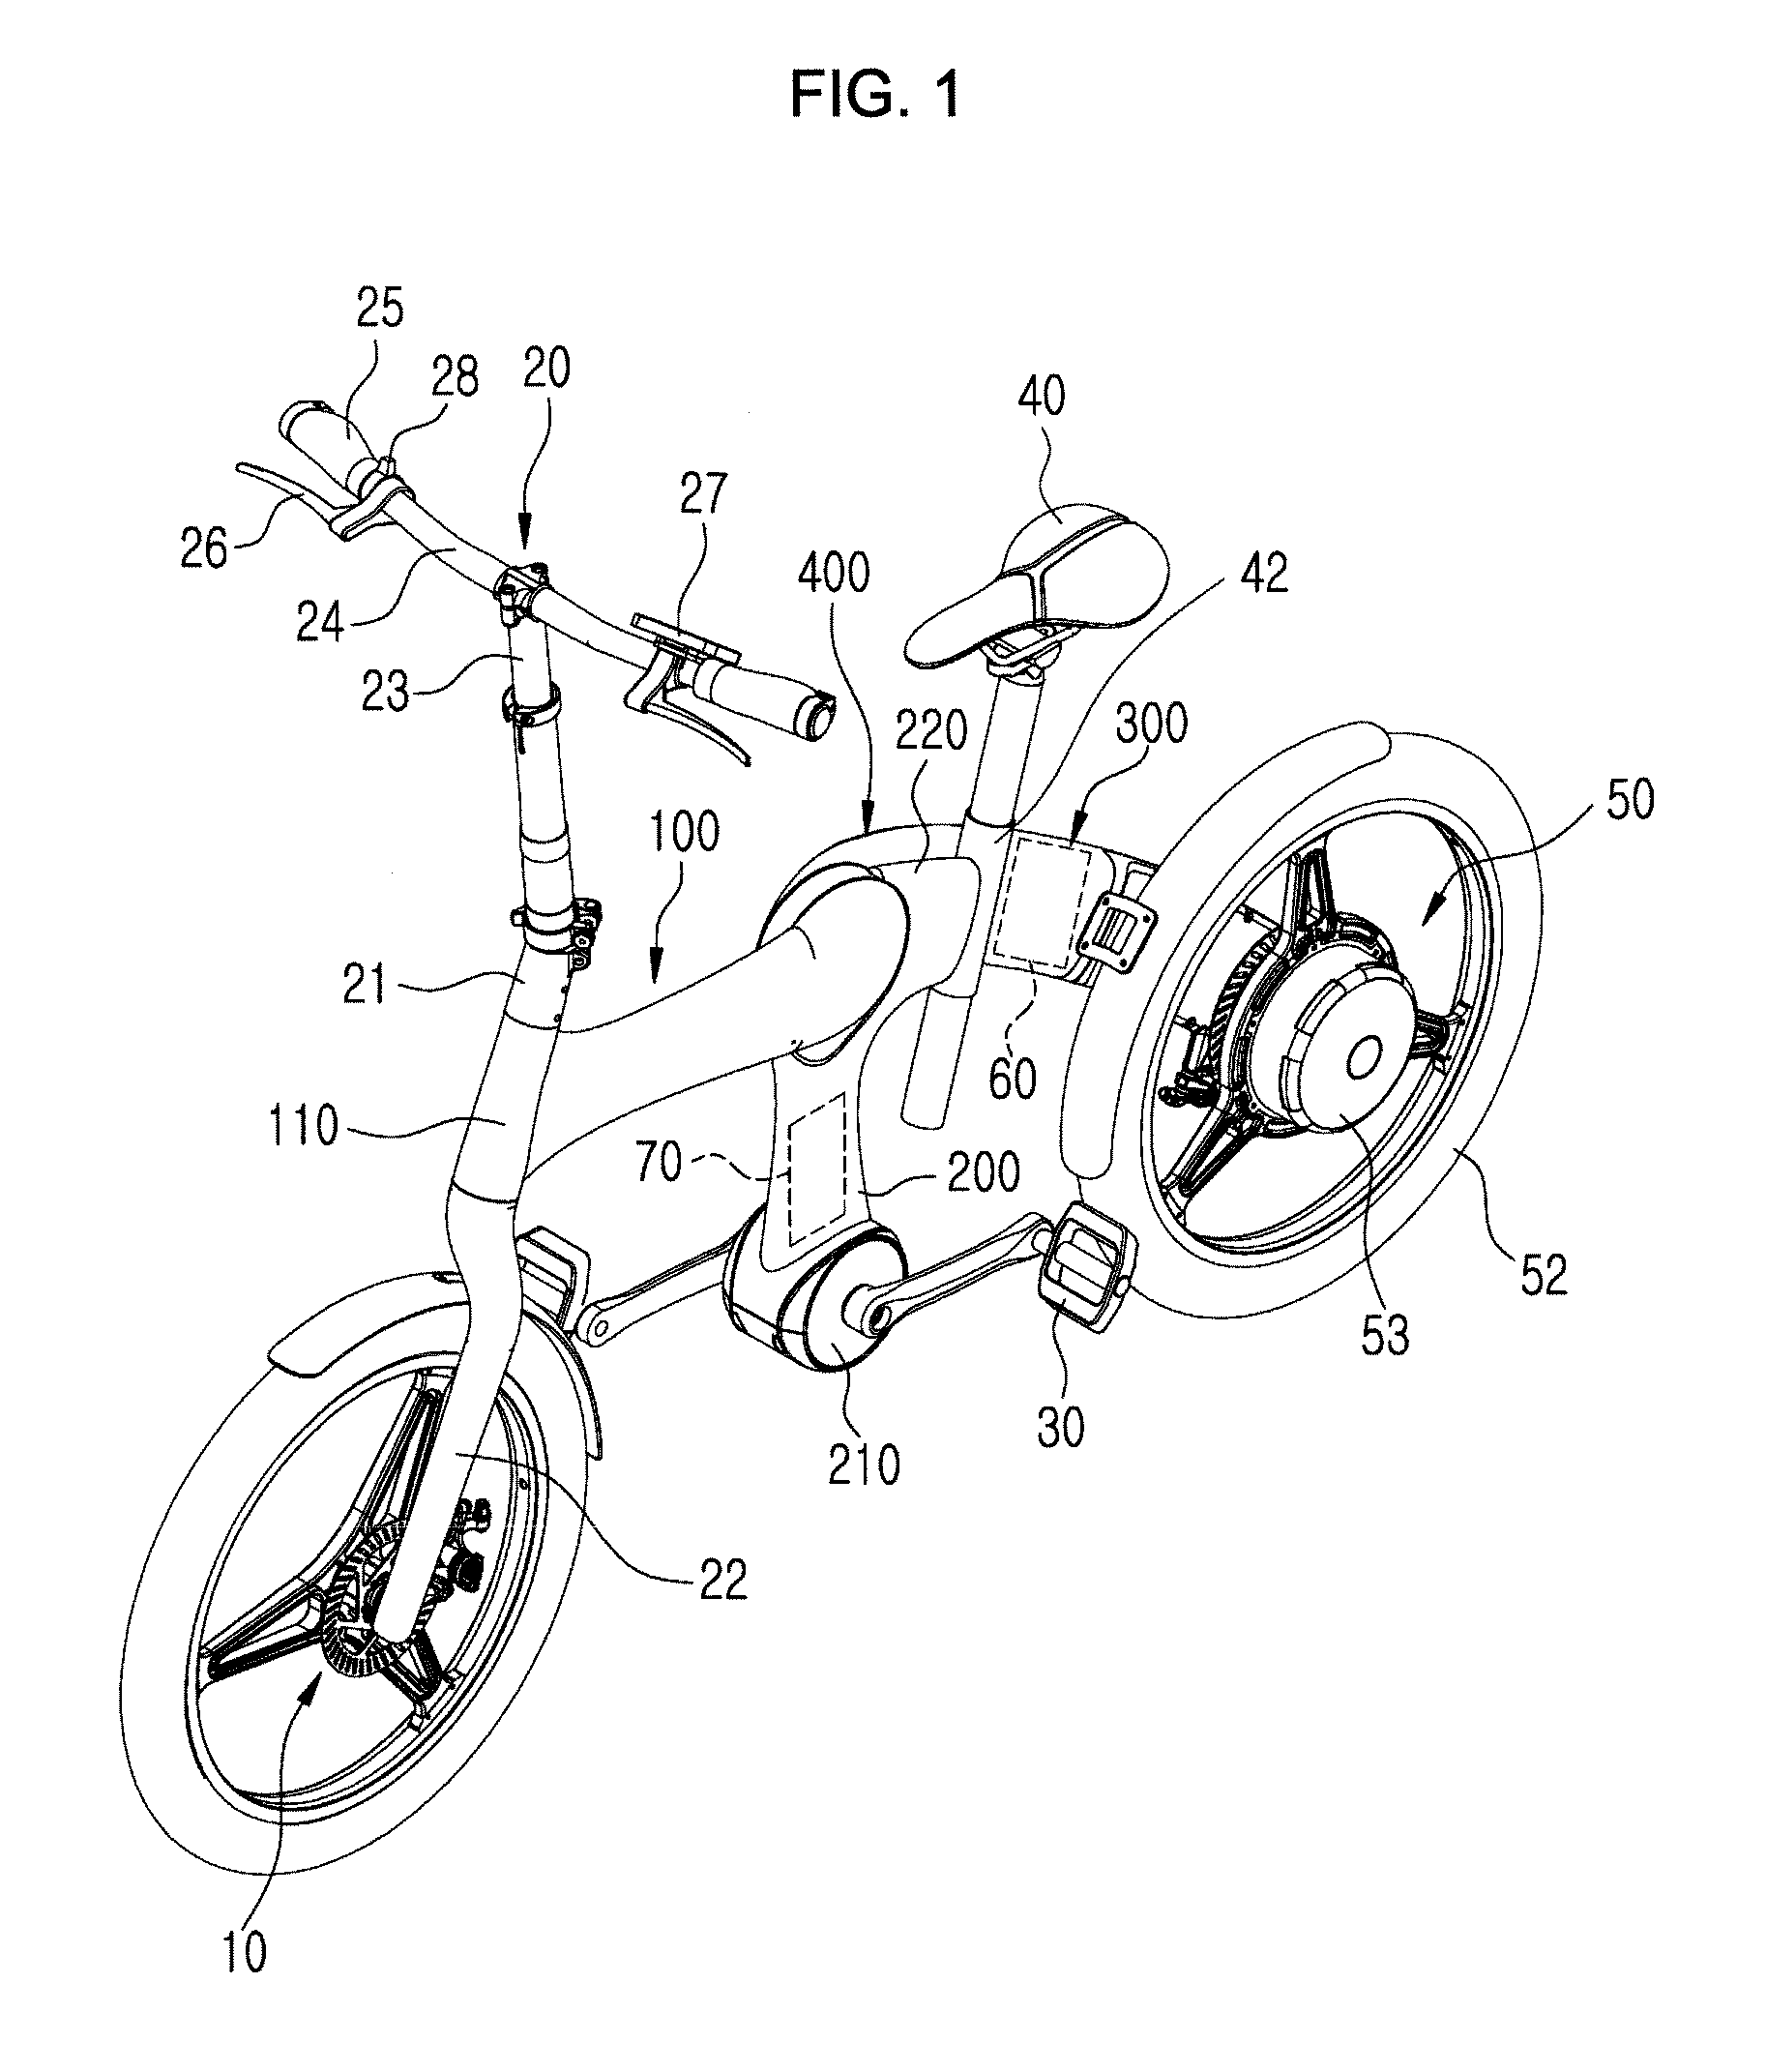 Motor housing integrated-type spoke for electric bicycle, manufacturing method thereof, wheel assembly having the same and manufacturing method thereof